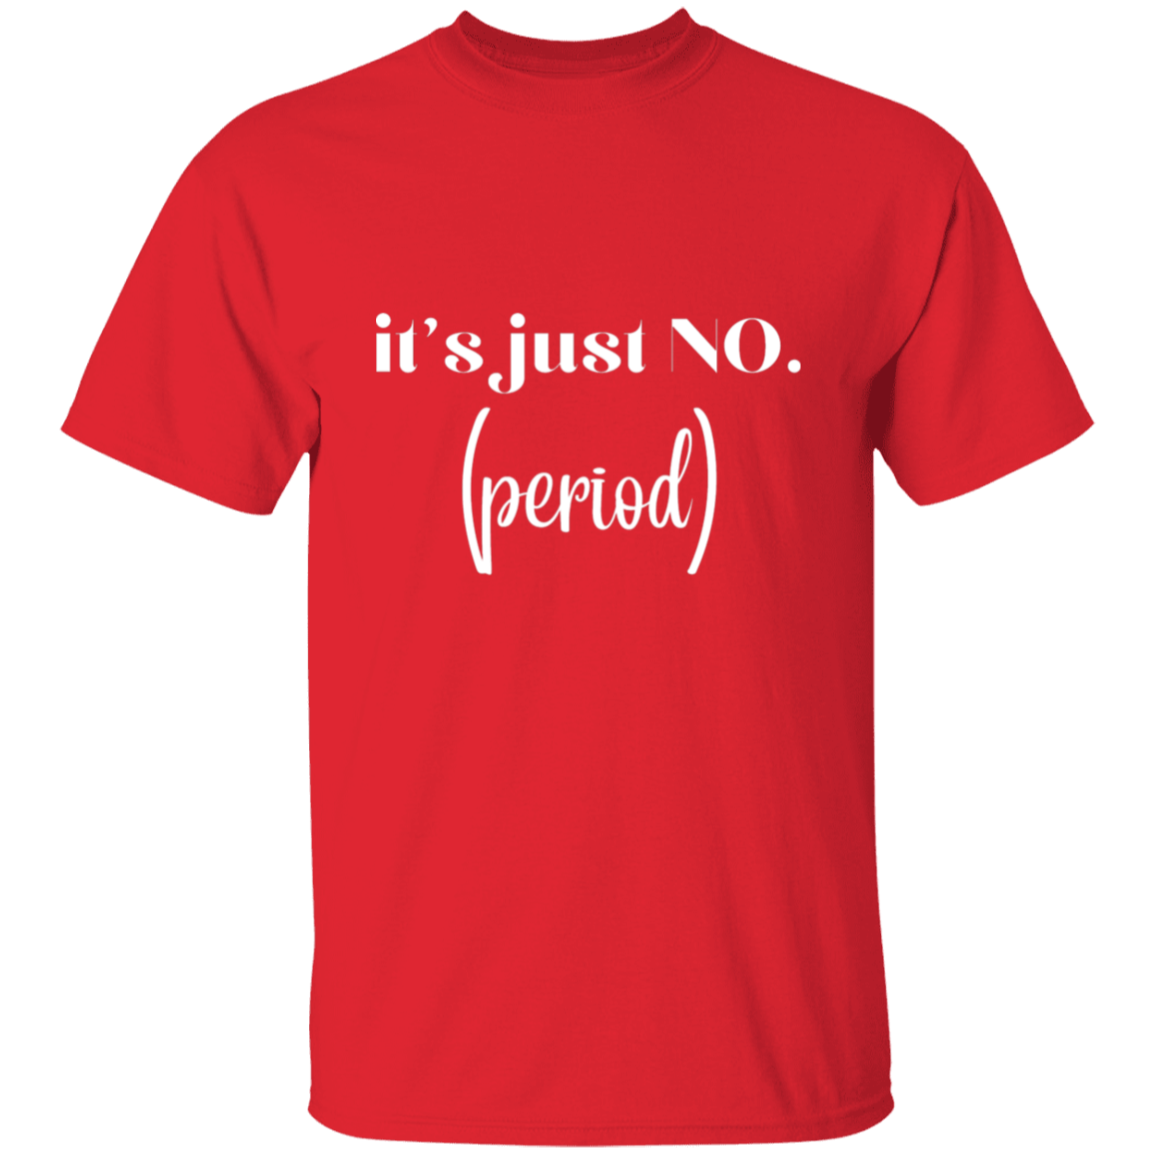 it's just no.(period). T-Shirt